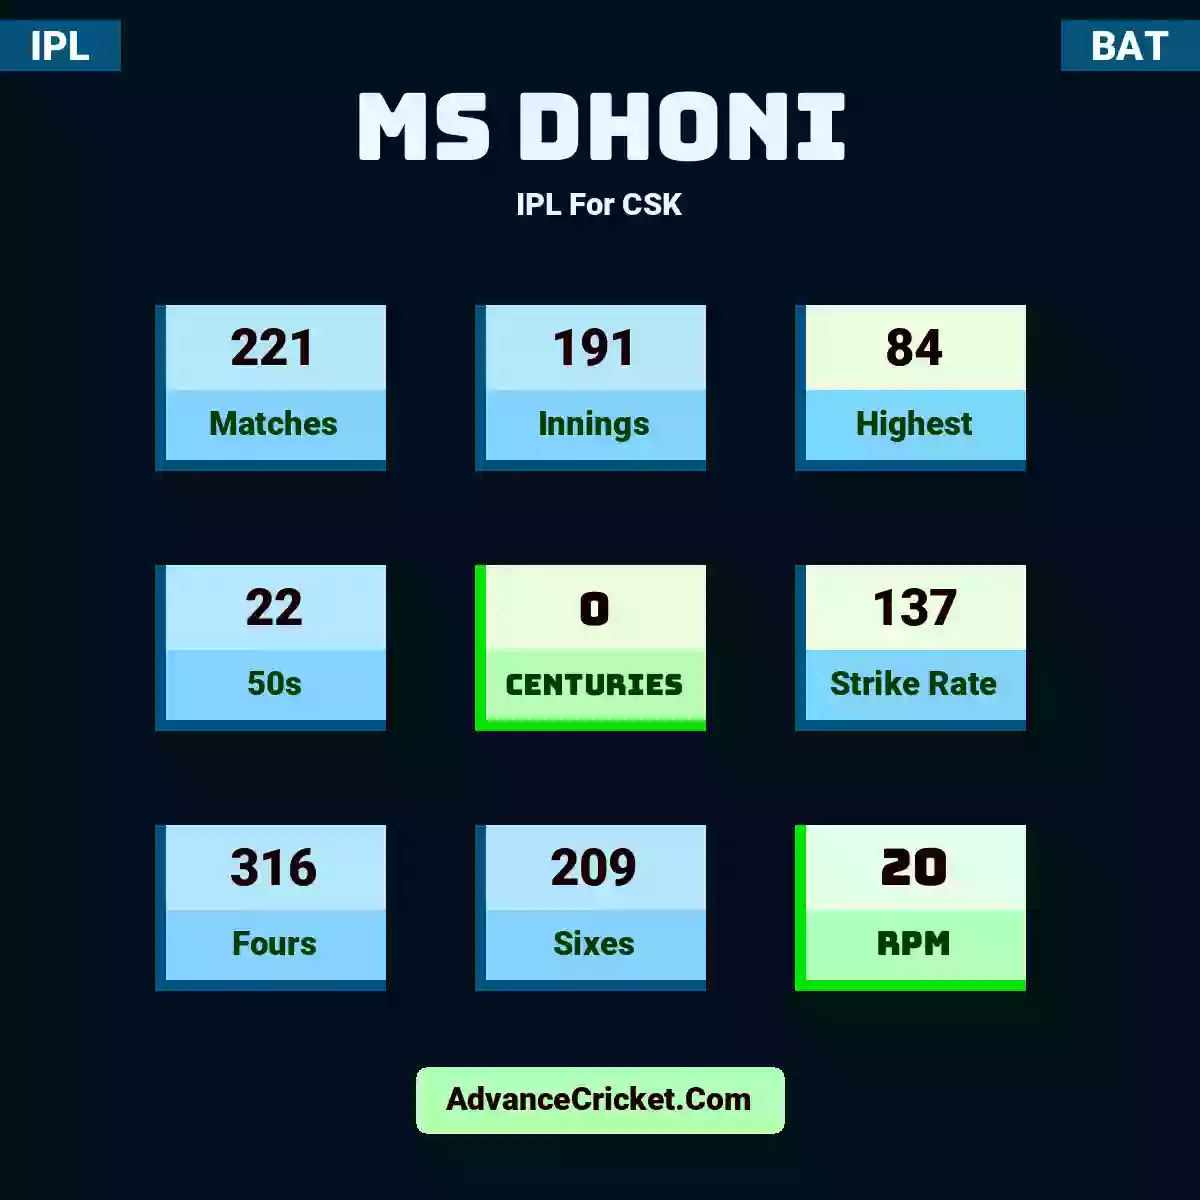 MS Dhoni IPL  For CSK, MS Dhoni played 221 matches, scored 84 runs as highest, 22 half-centuries, and 0 centuries, with a strike rate of 137. M.Dhoni hit 316 fours and 209 sixes, with an RPM of 20.